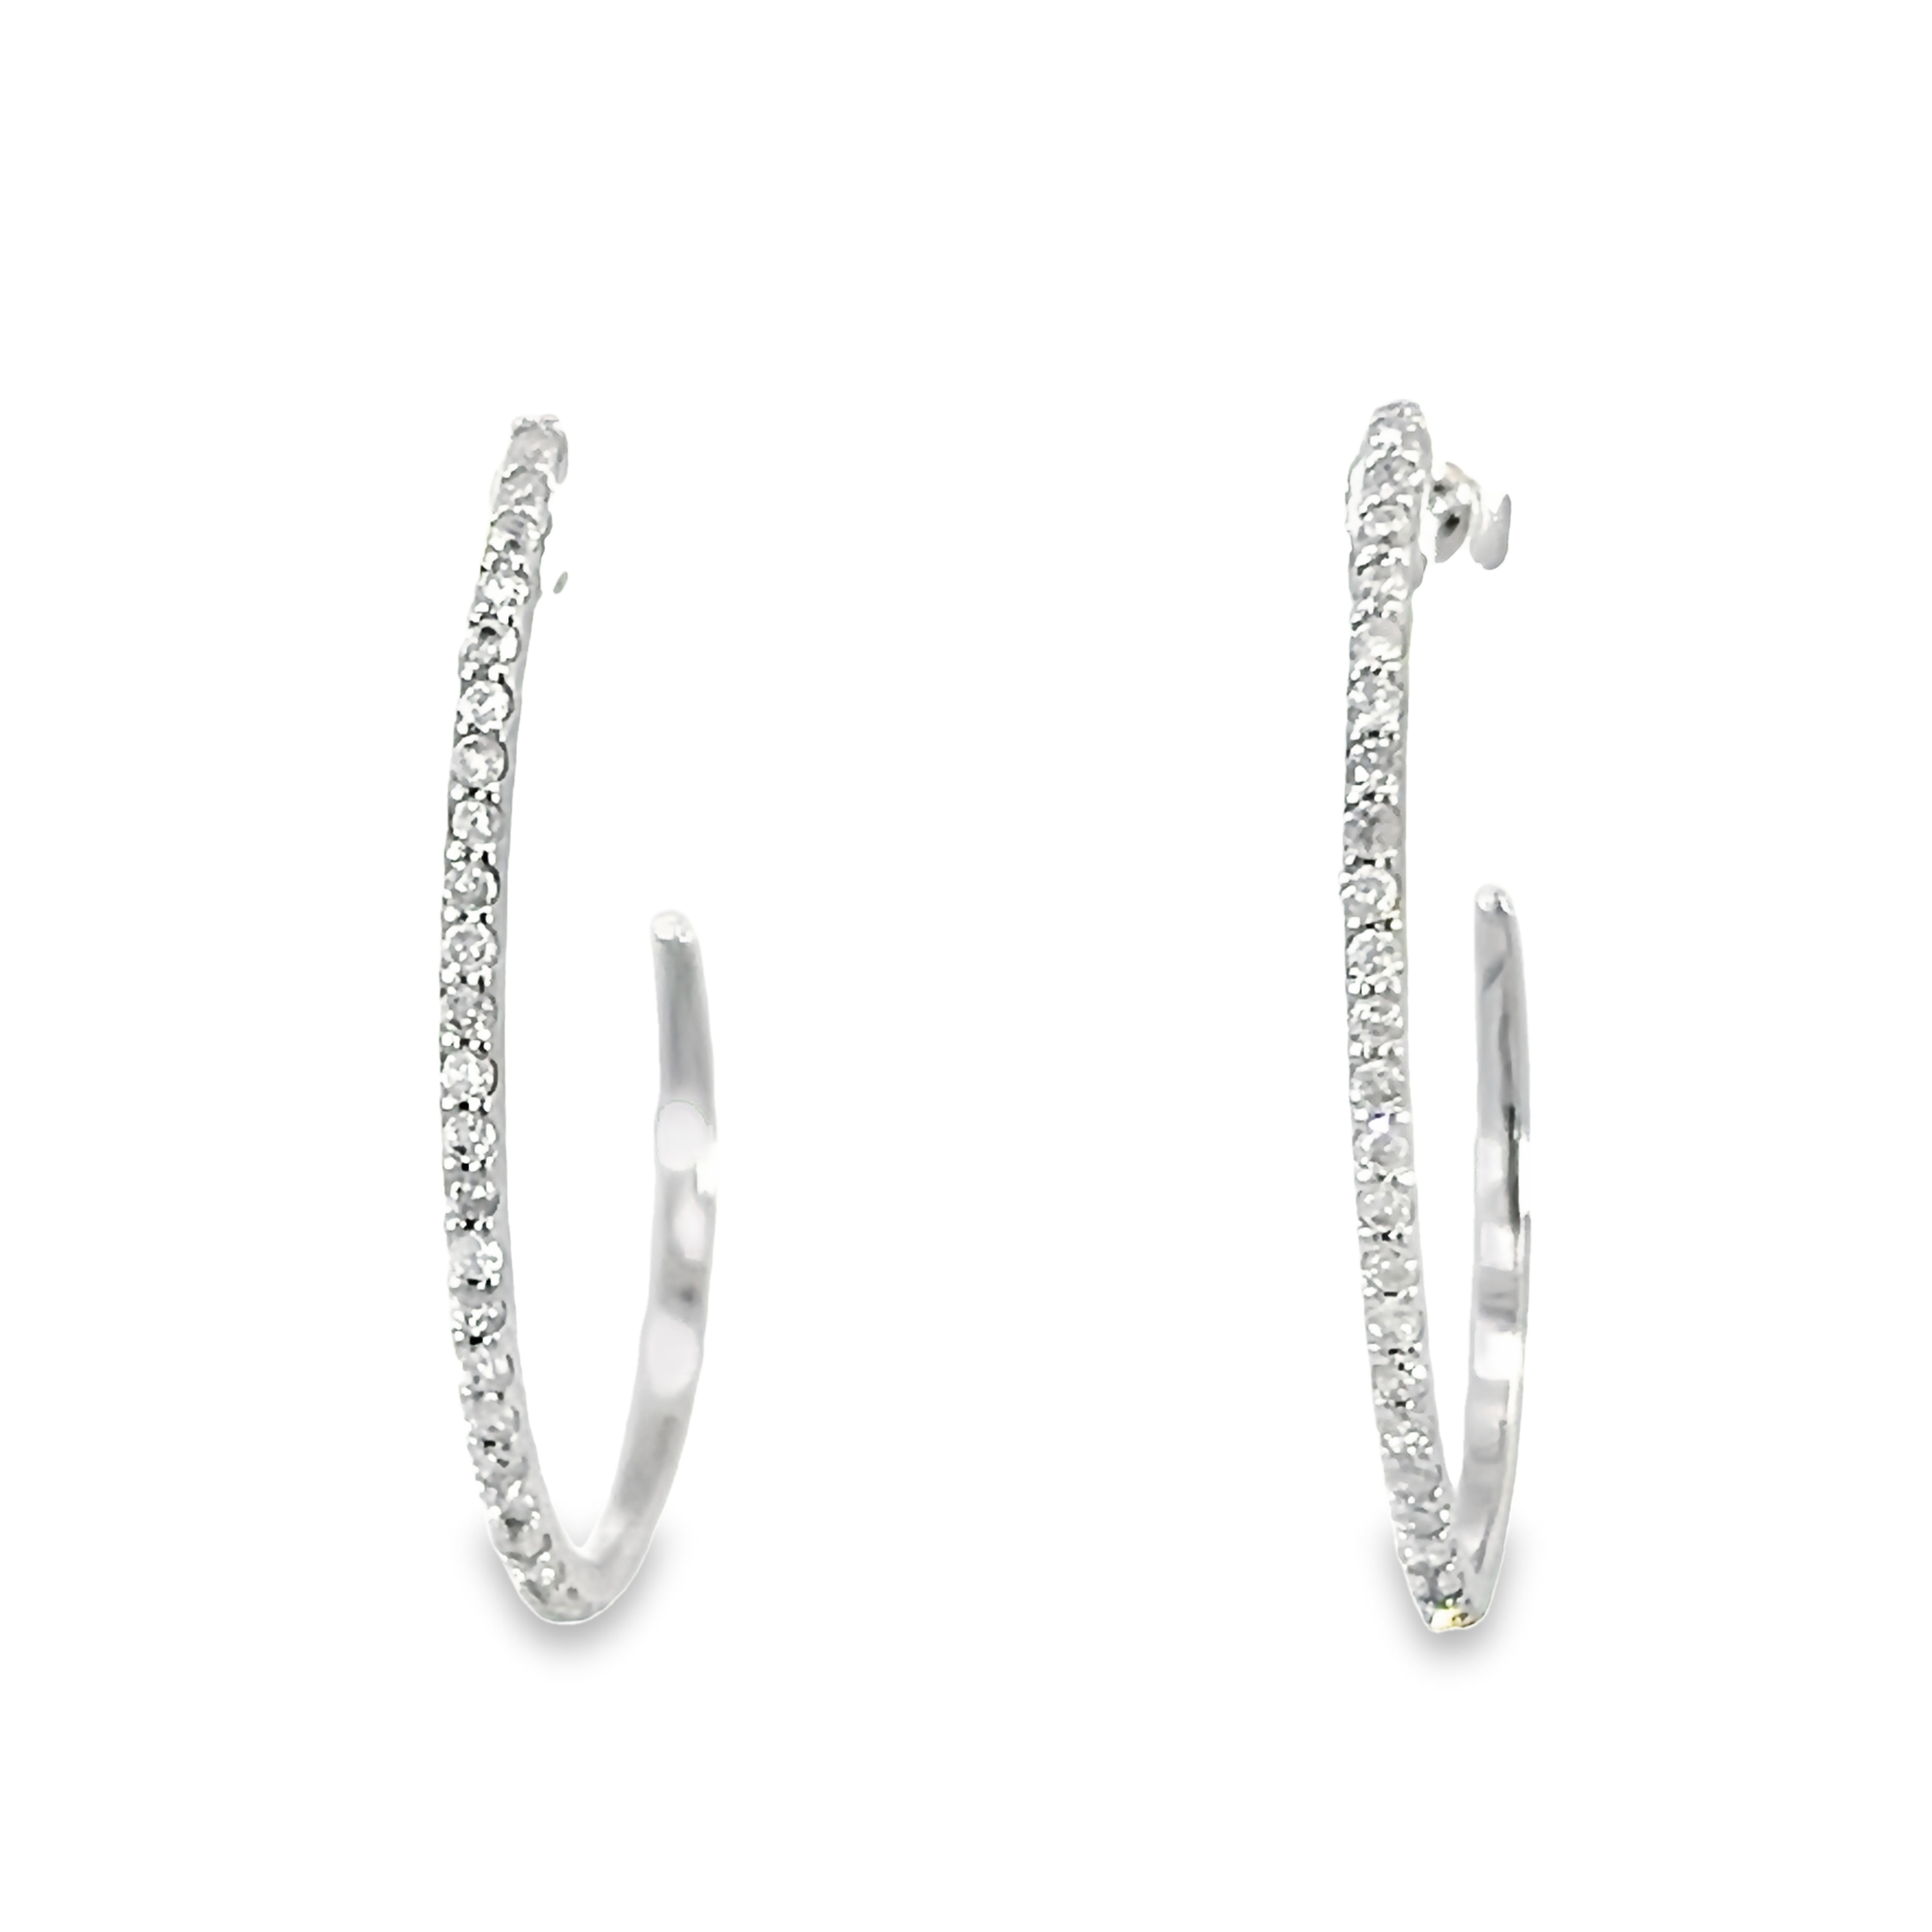 14 Karat white gold earrings with 50=0.25 total weight round brilliant G I Diamonds